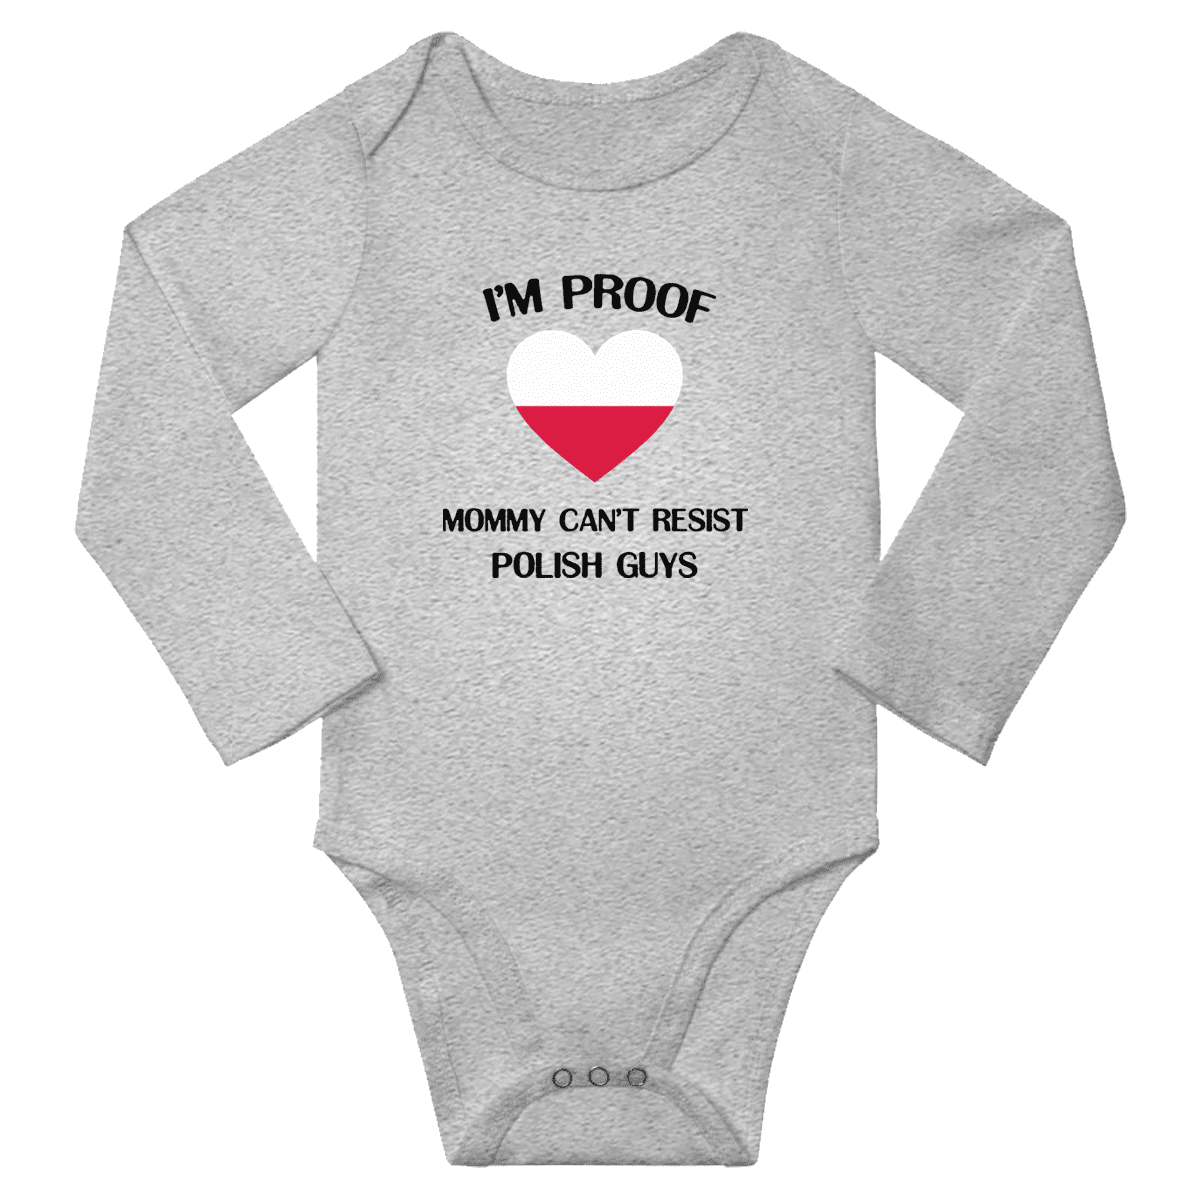 I'm Proof Mommy Can't Resist Polish Guys Baby Long Sleeve Bodysuit